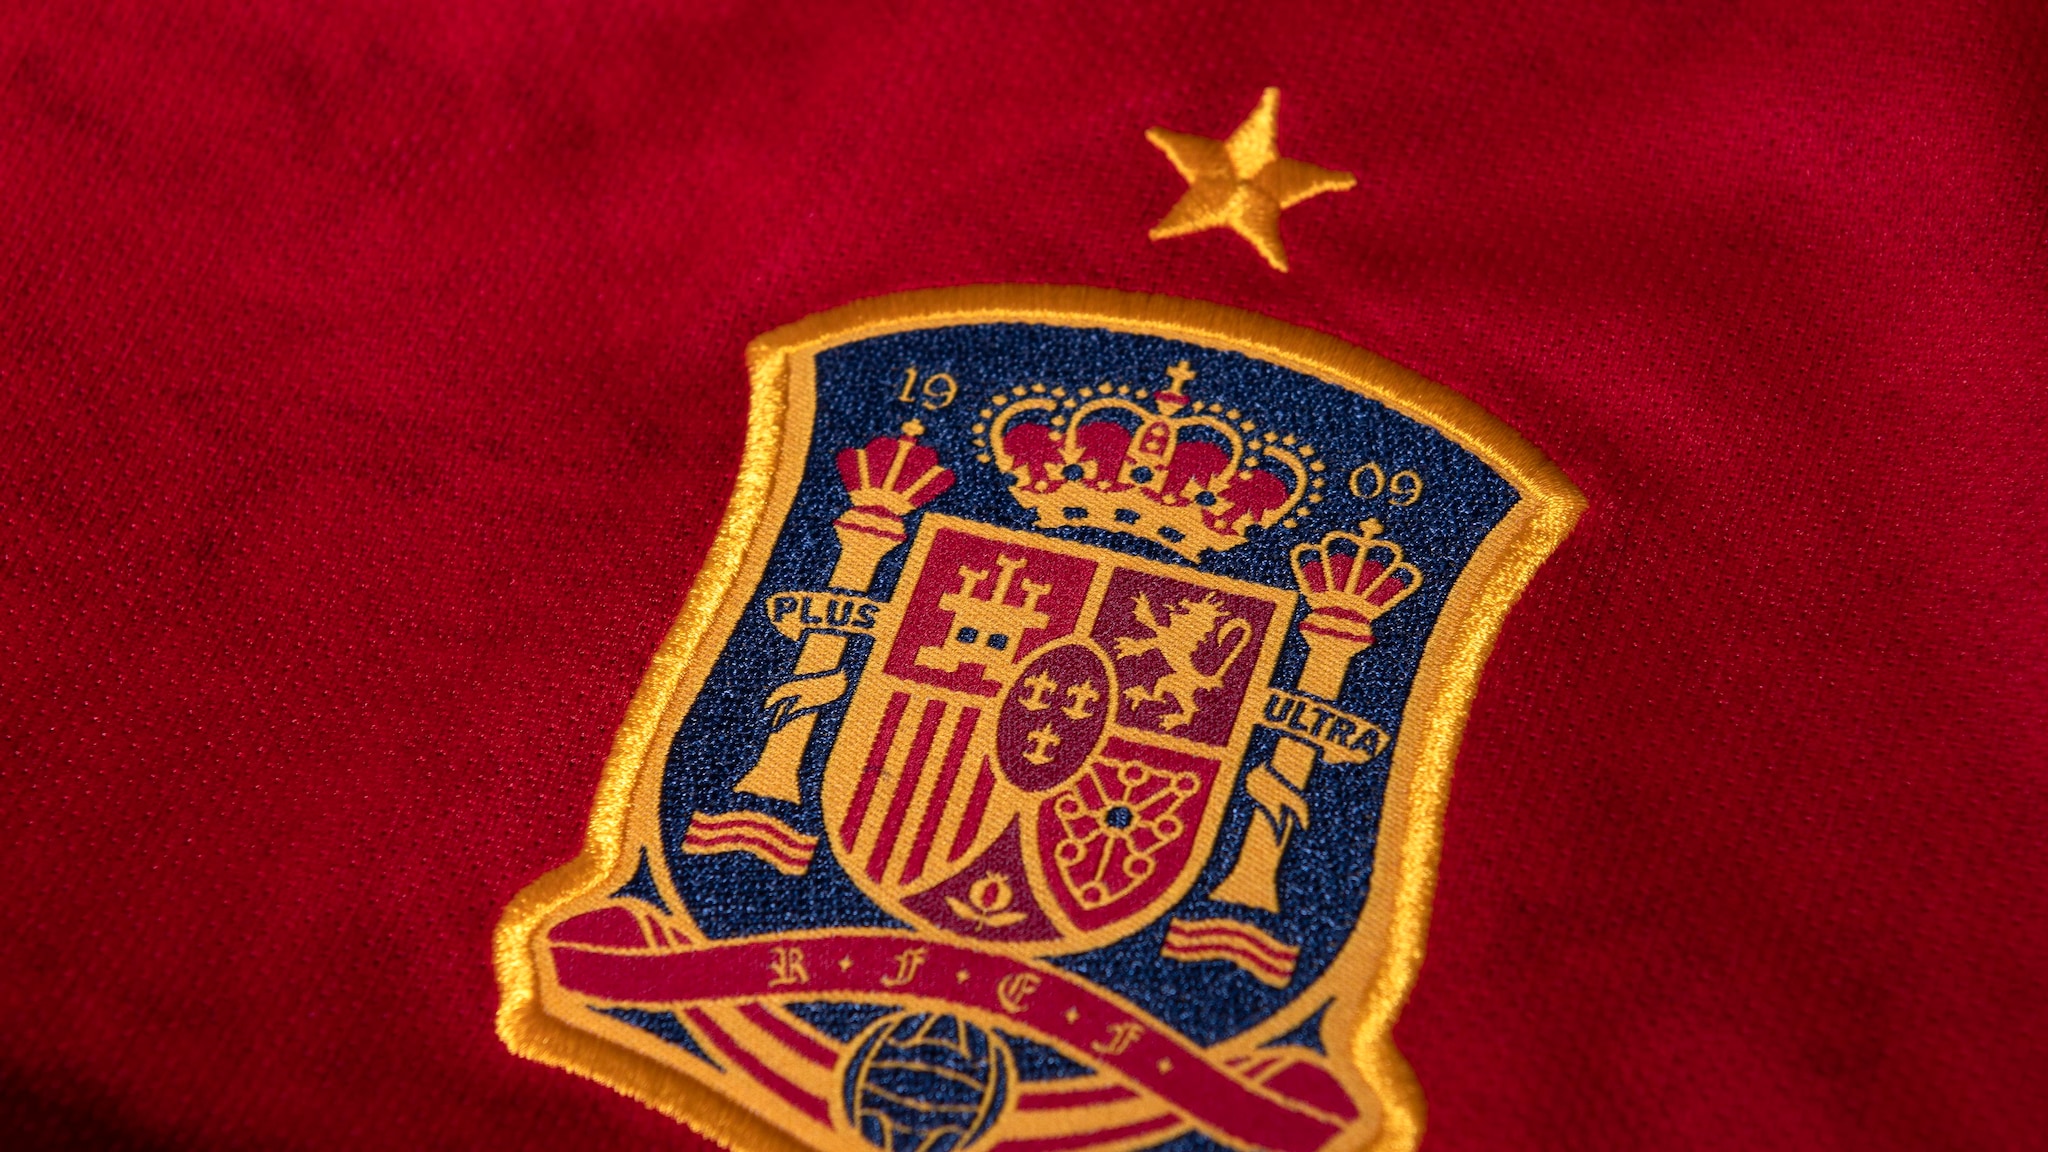 15 players resign from the Spain National Team | CaughtOffside